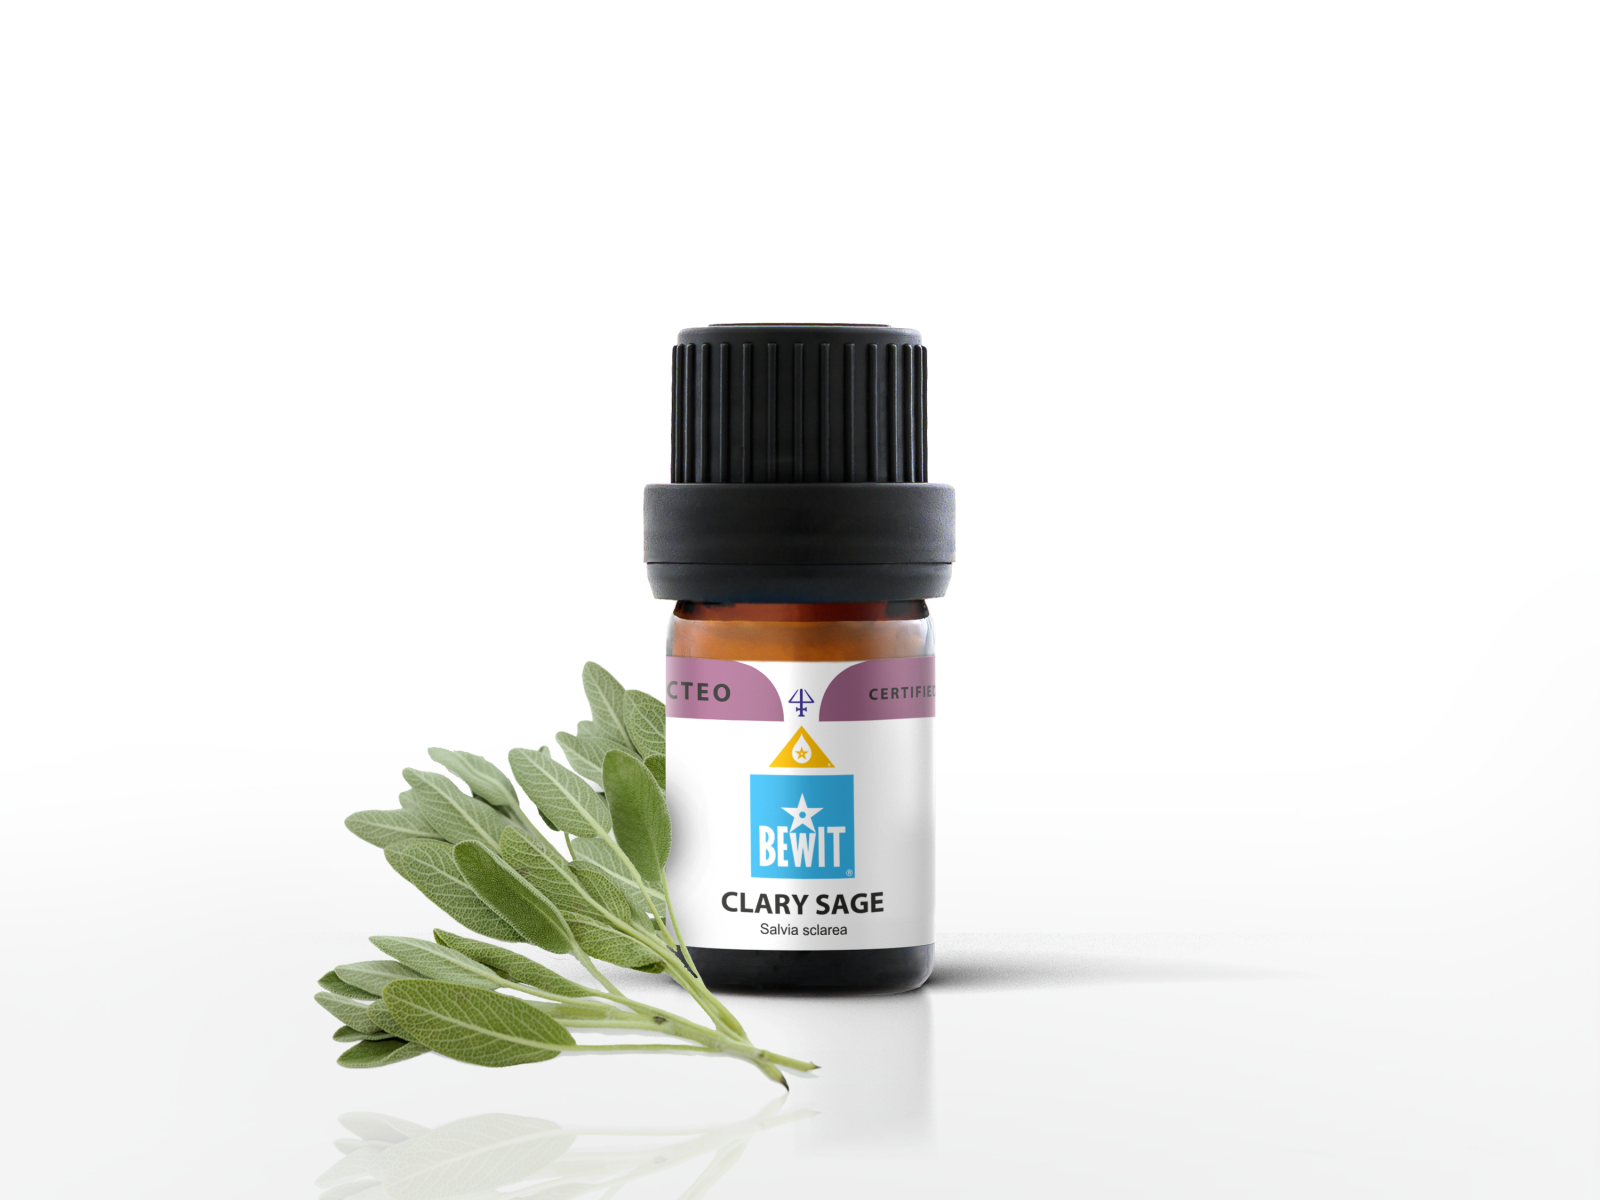 Clary sage - It is a 100% pure essential oil - 2